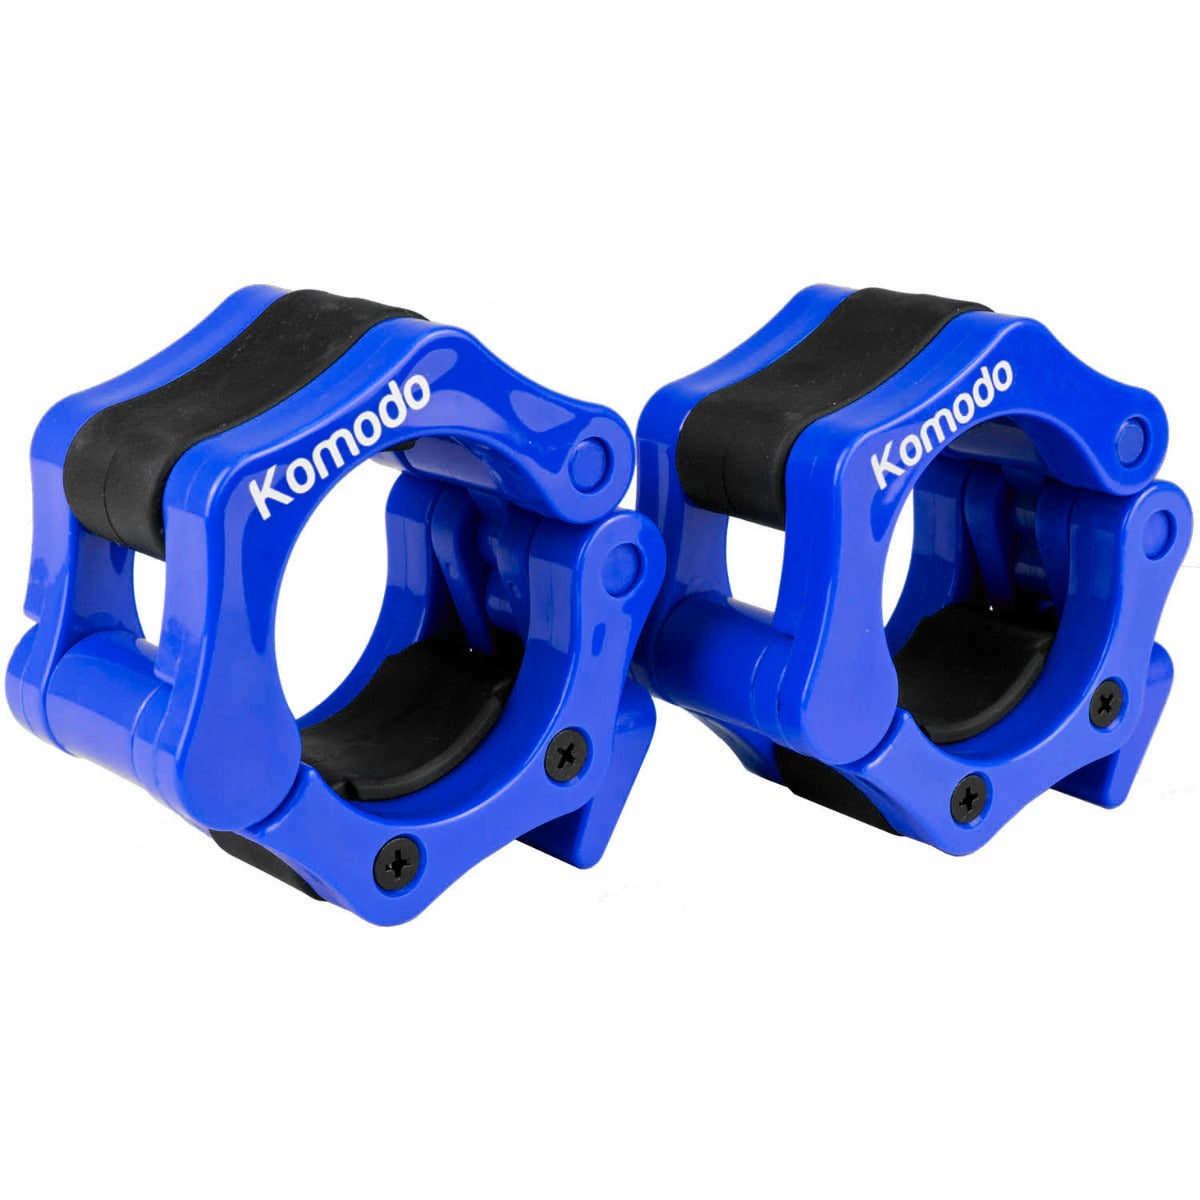 2 Inch Barbell Weight Collars - Blue